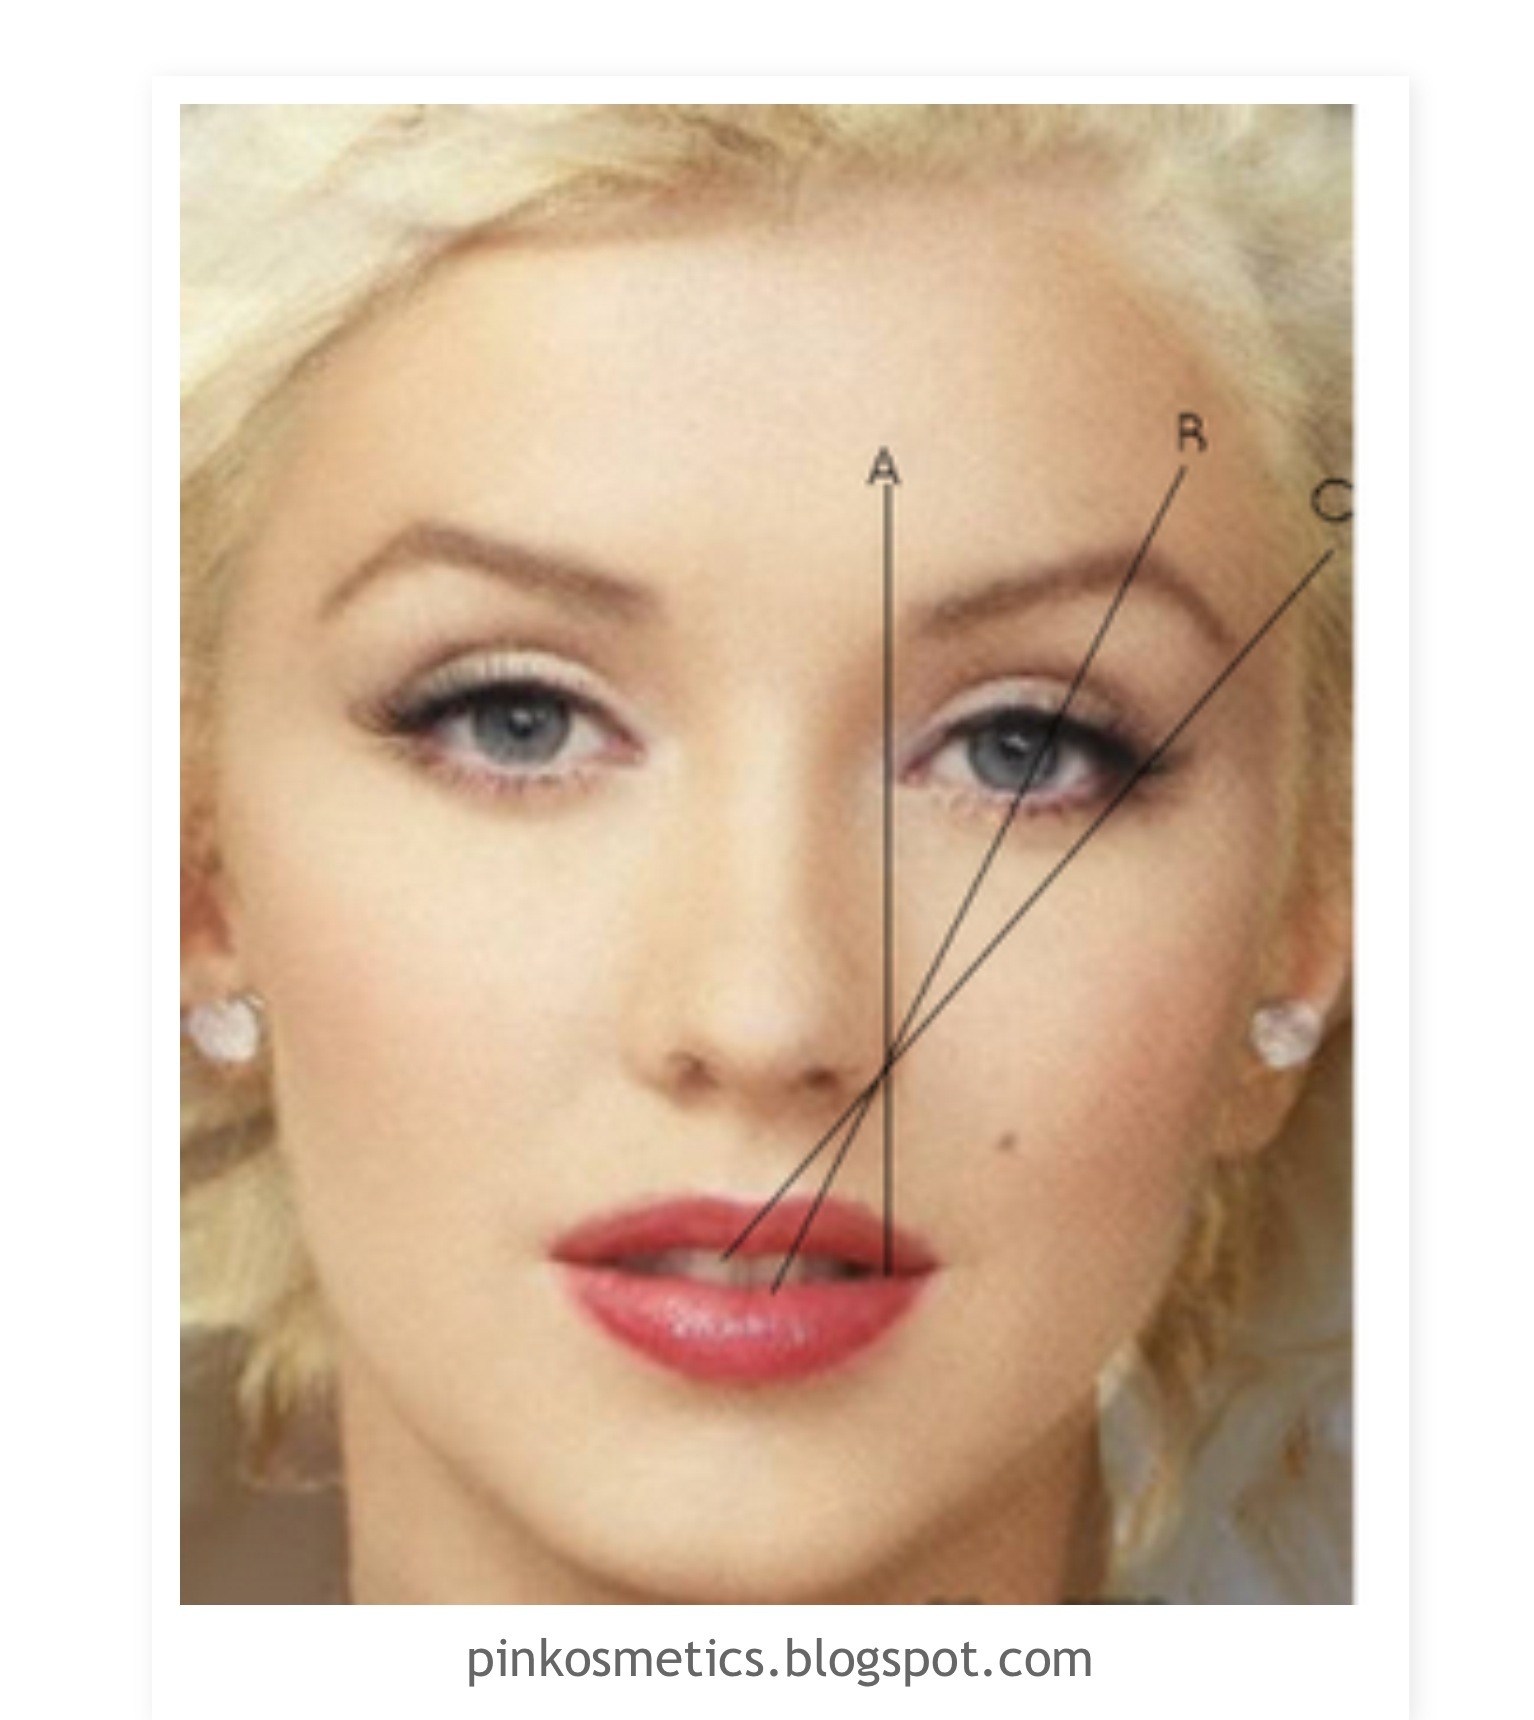 Brows Makeup Tutorials: How to Get Perfect Eyebrows - Pretty Designs does great clips do eyebrows